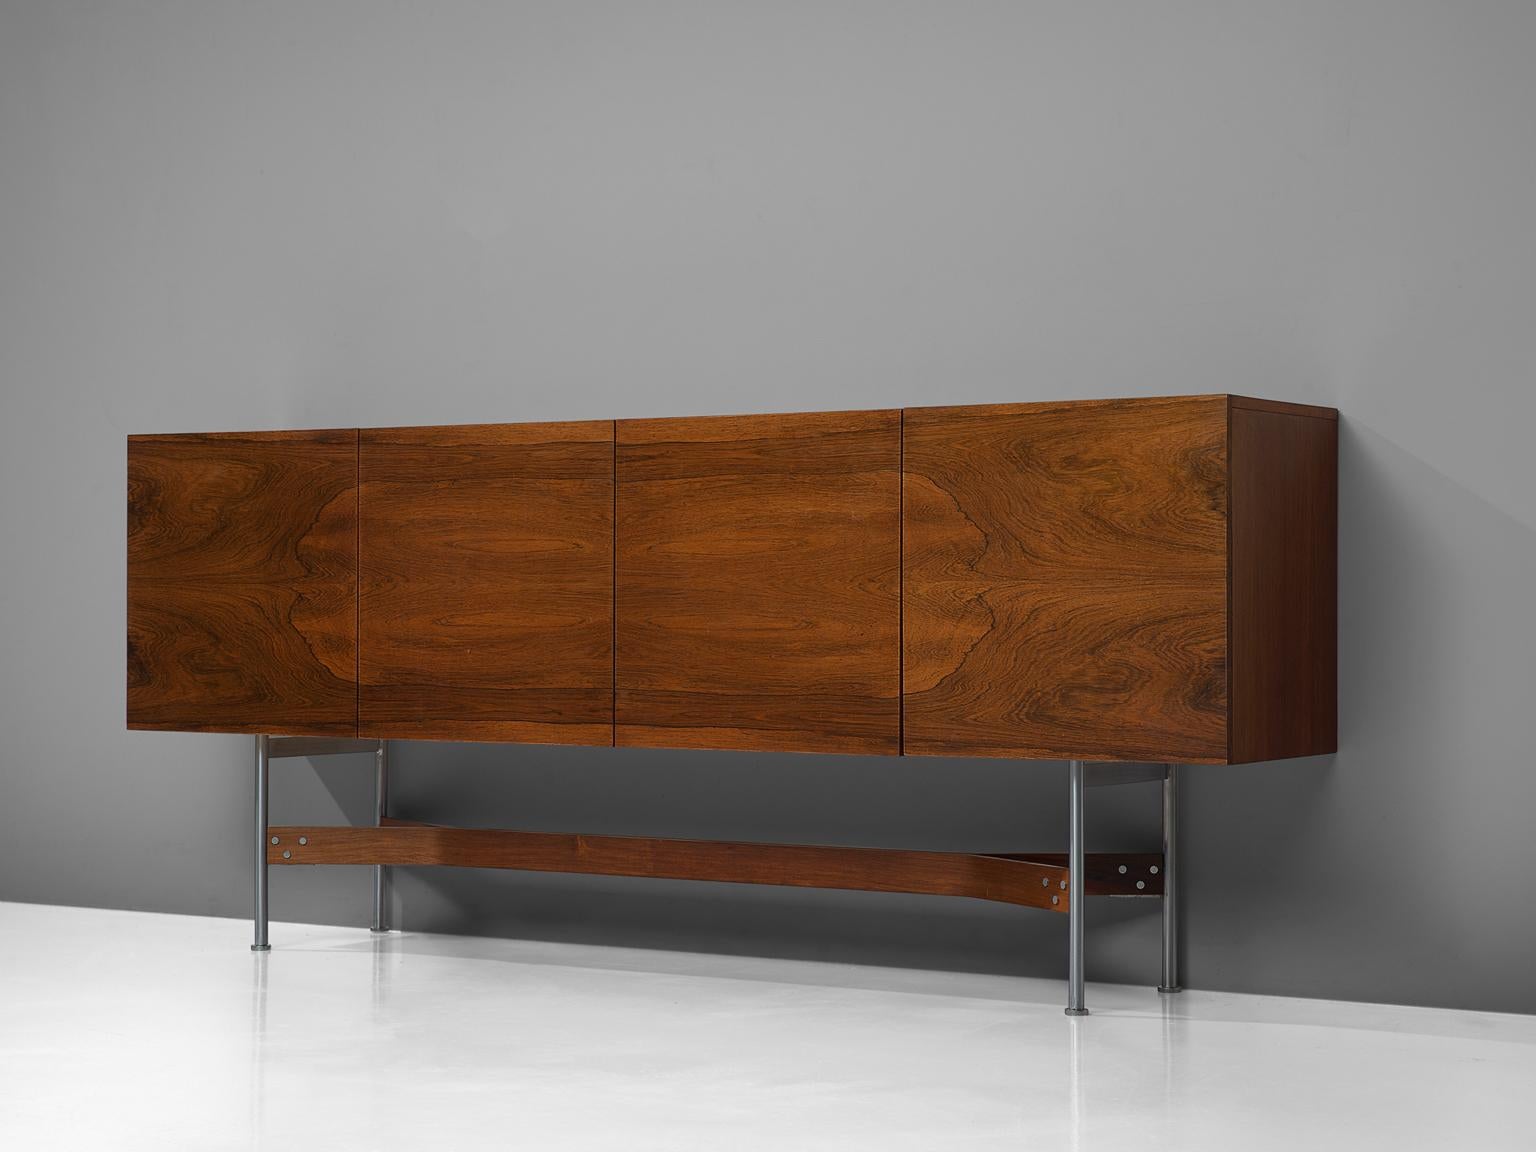 Rudolf Bernd Glatzel for Fristho Franeker, sideboard, rosewood and metal, the Netherlands, 1962. 

This refined high board is designed by Rudolf Bernd Glatzel for Fristho. The large sideboard shows stunning crafted details with a bookmatched